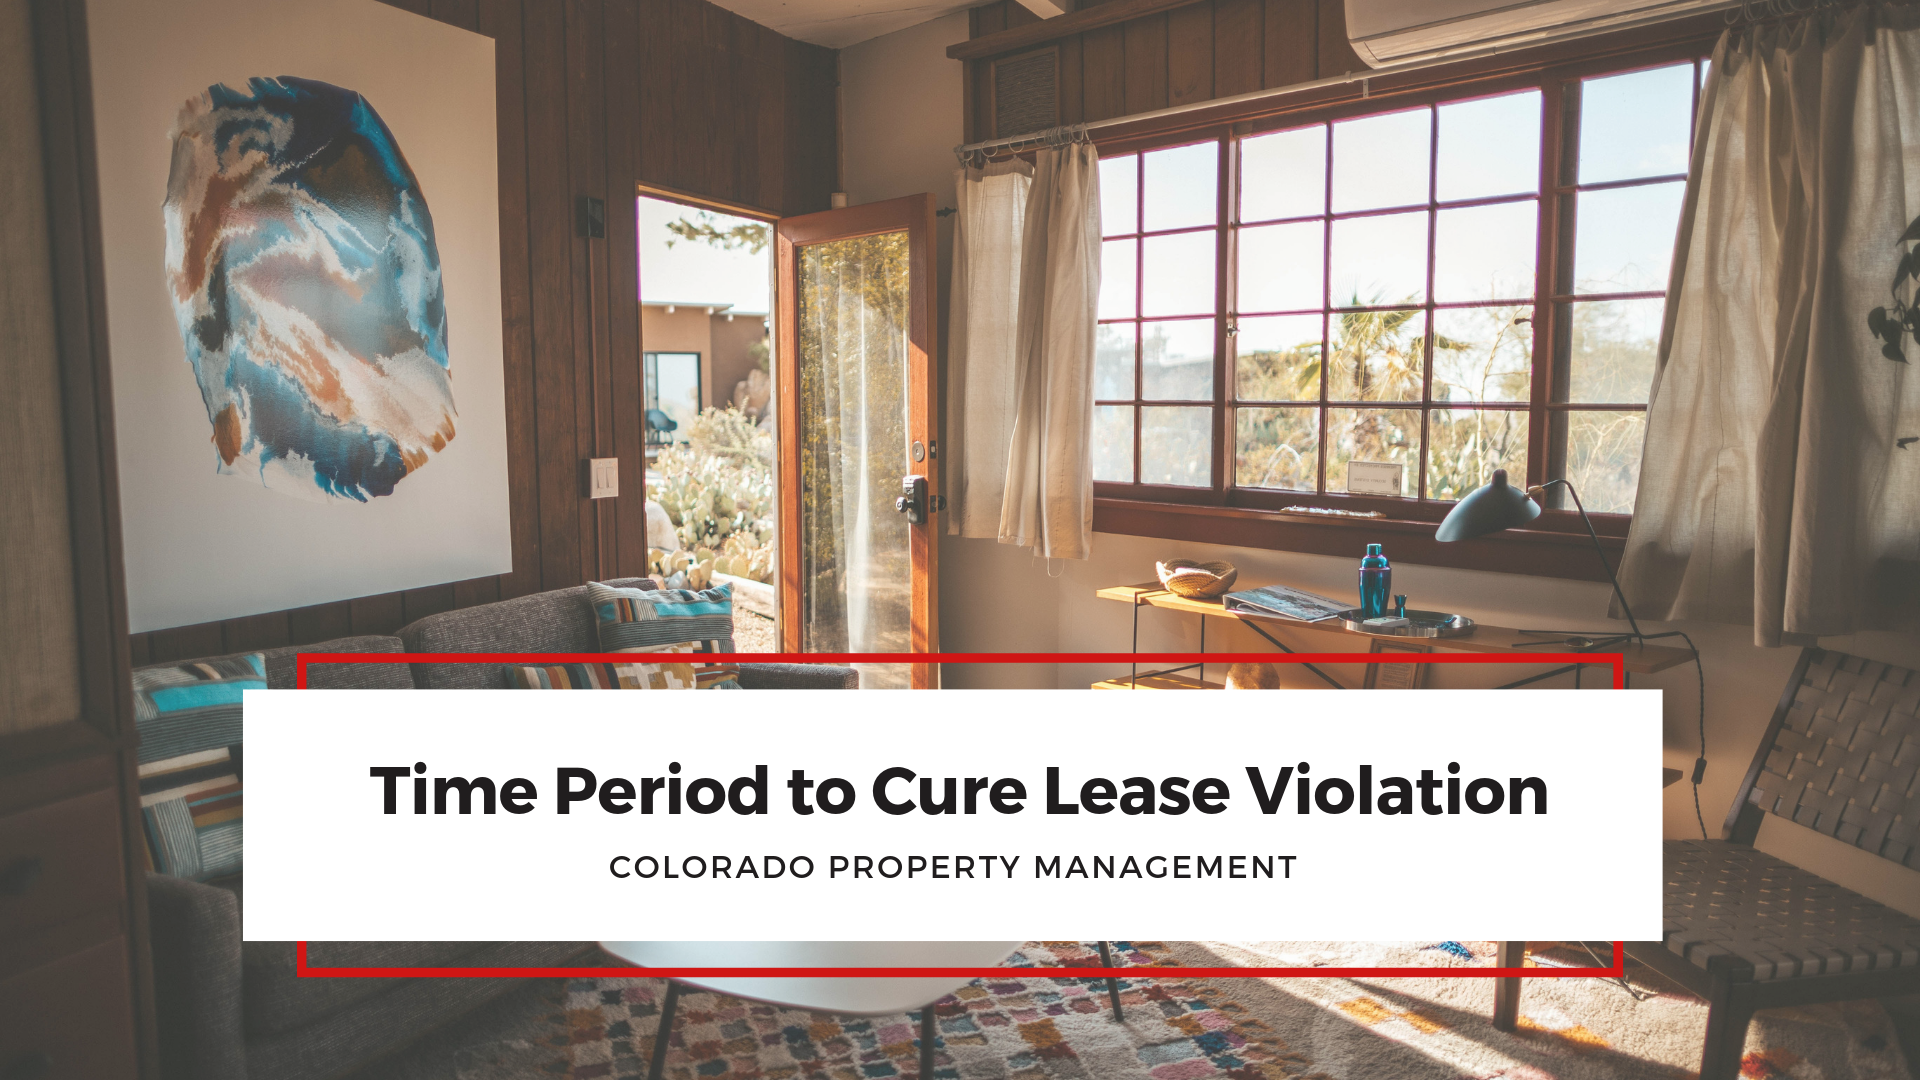 Time Period to Cure Lease Violation for Colorado Rentals